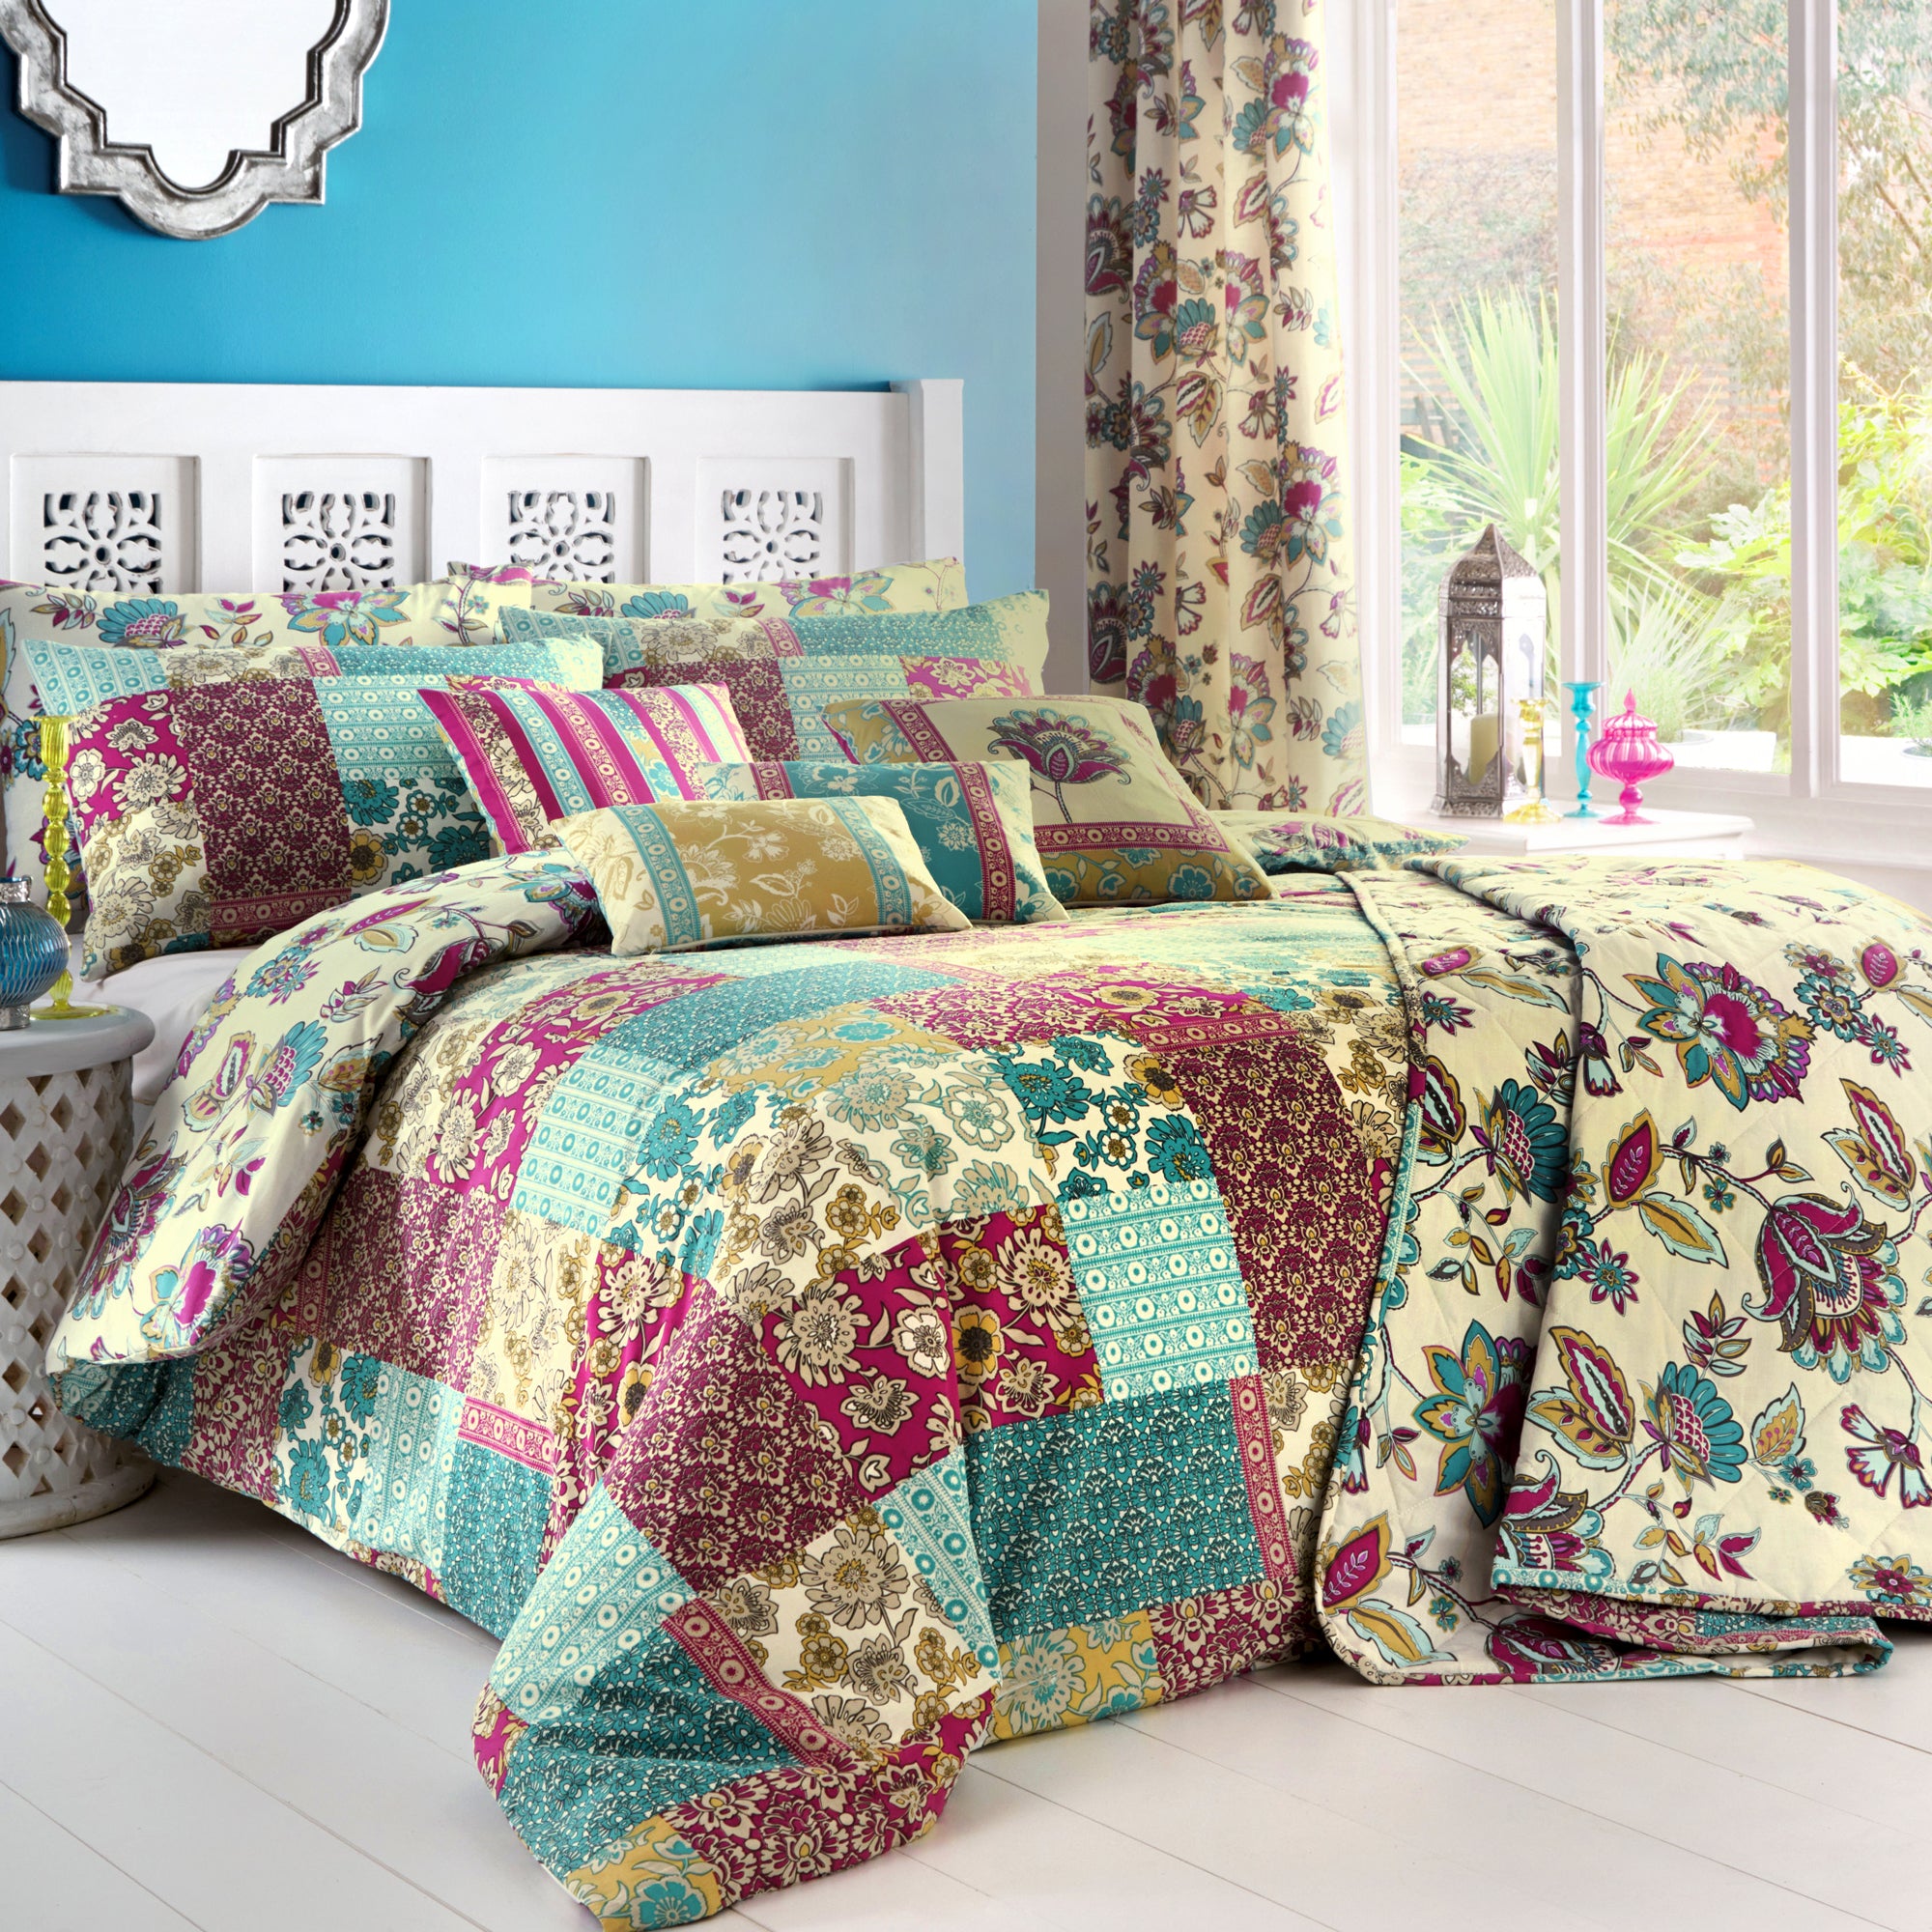 Marinelli - Easy Care Bedding & Curtains in Teal- by Dreams & Drapes